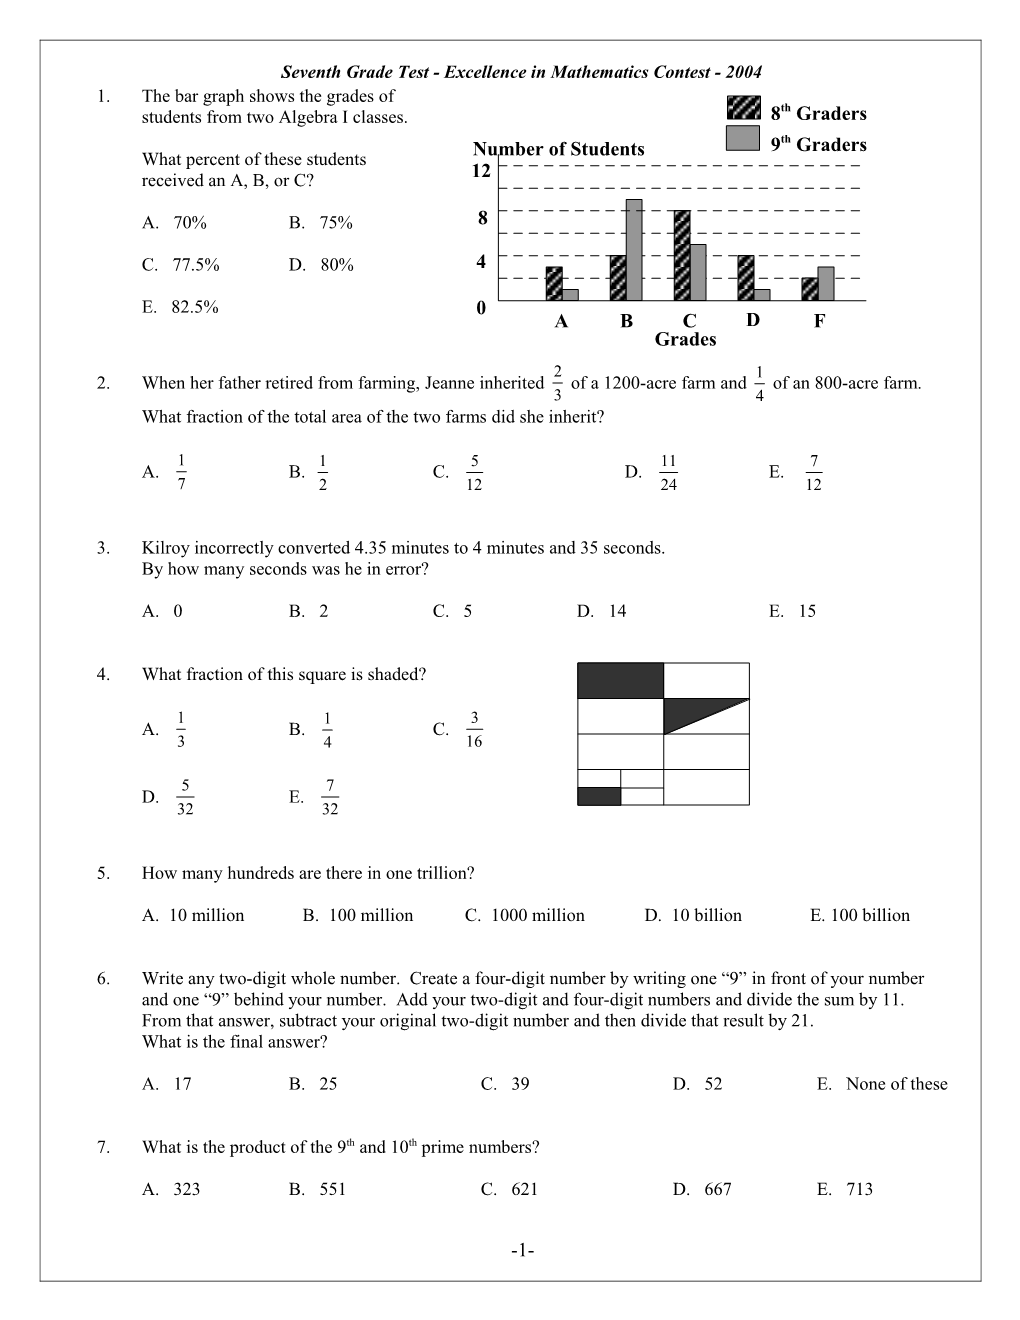 Seventh Grade Test - Excellence in Mathematics Contest - 2004